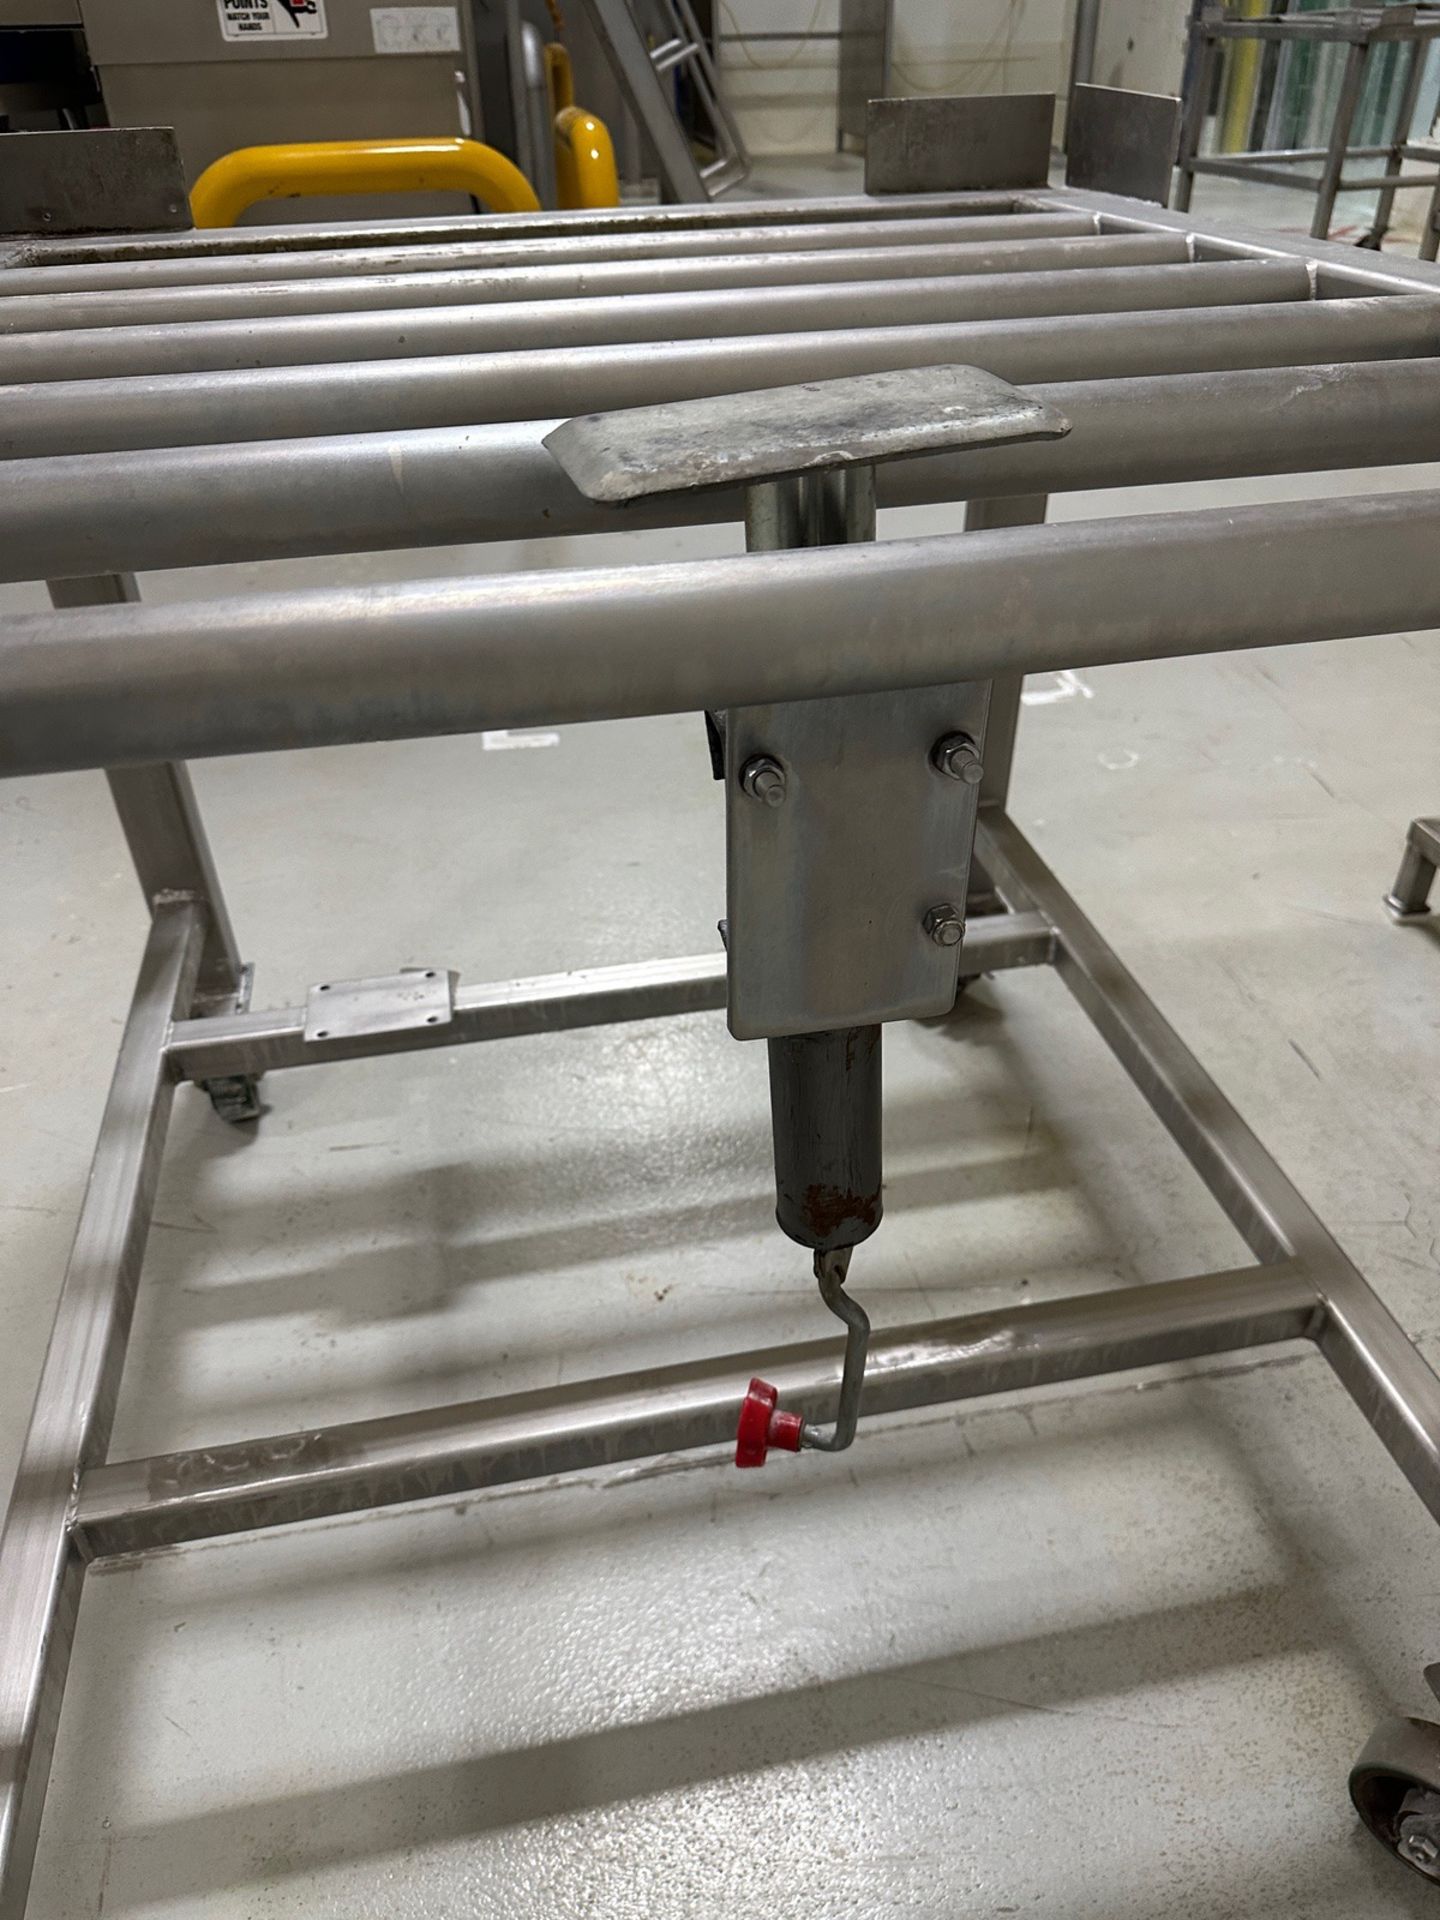 Stainless Steel Tote Stand with Hand Powered Tilting Jack | Rig Fee $25 - Image 2 of 2